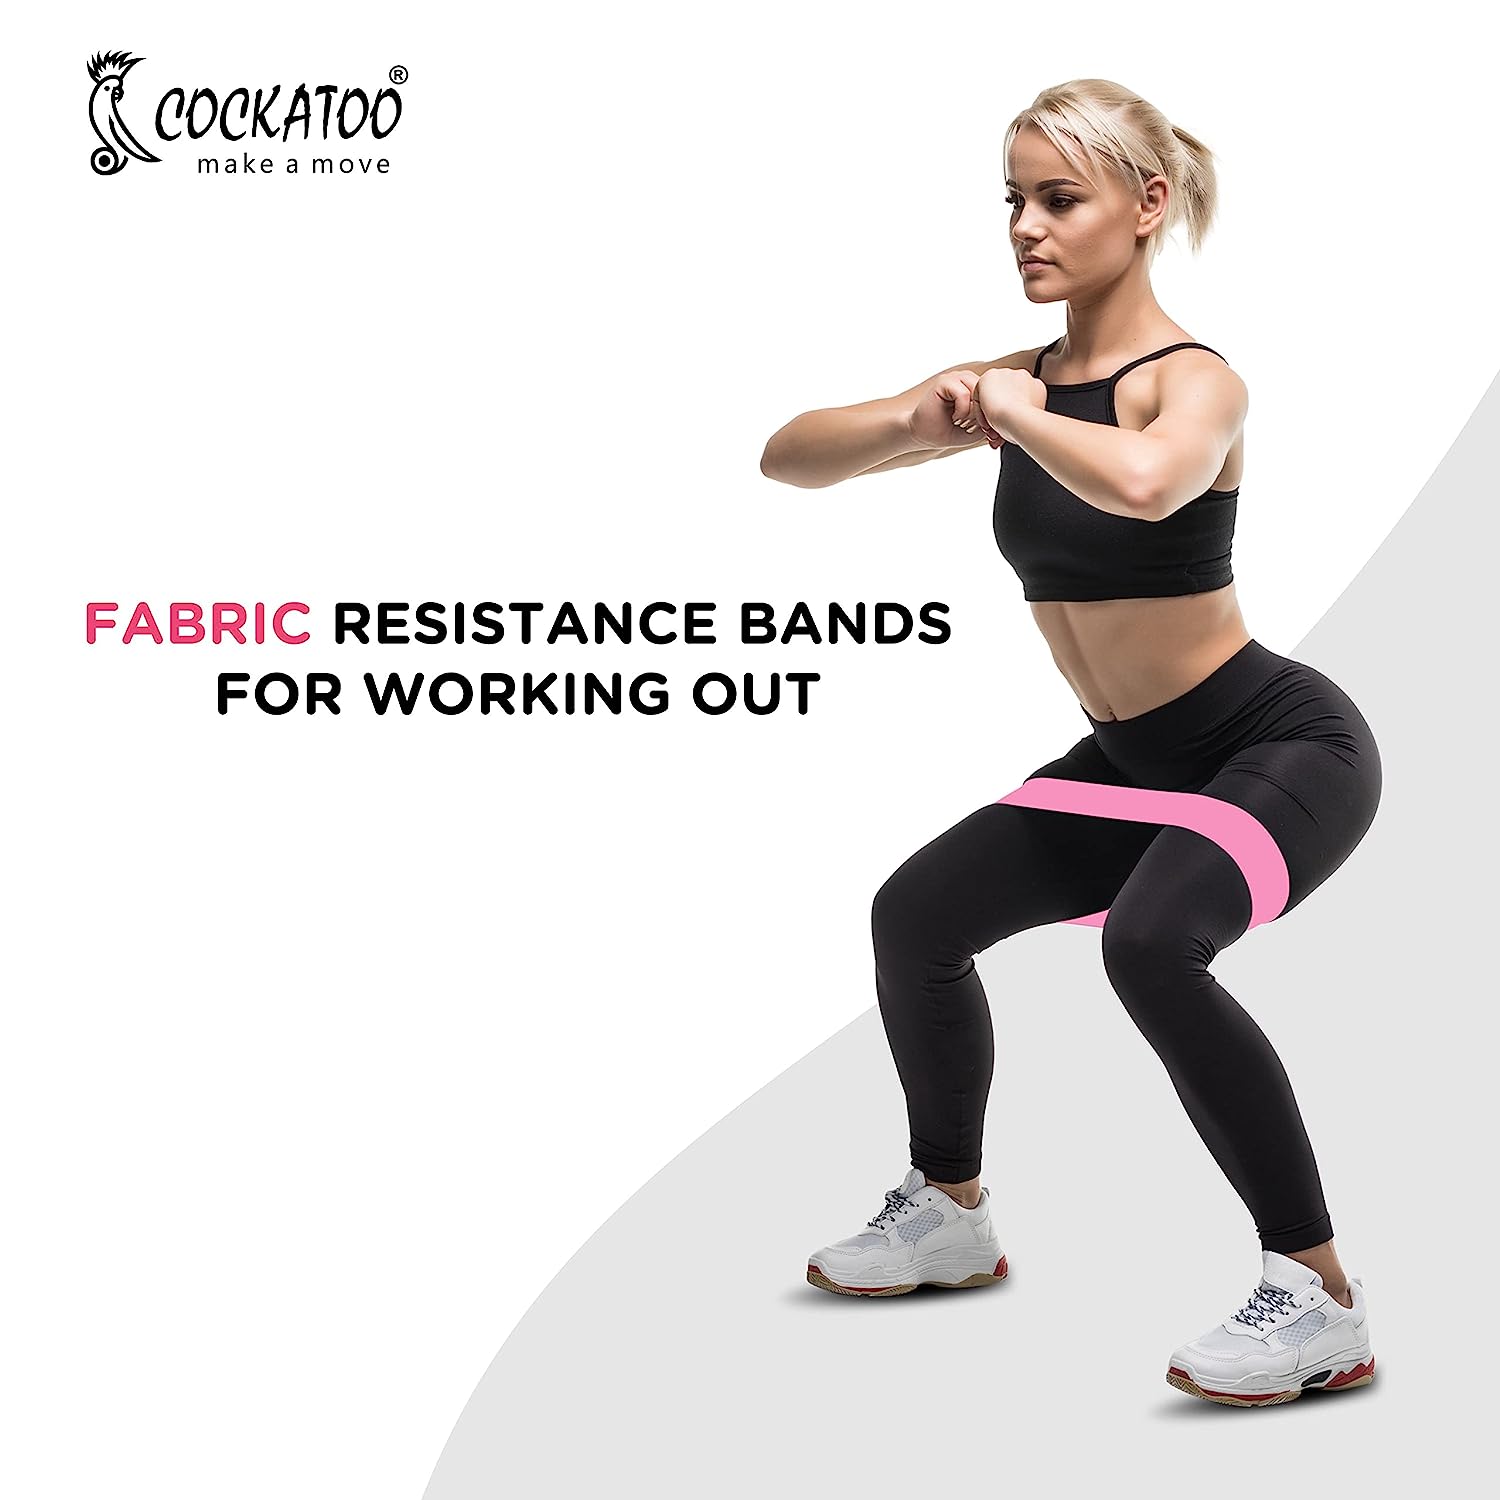 Cockatoo Fabric Resistance Bands for Working Out, Exercise Bands Workout, 3  Booty Bands for Women Legs and Glutes, Pilates Flexbands,Loop Hip Band for